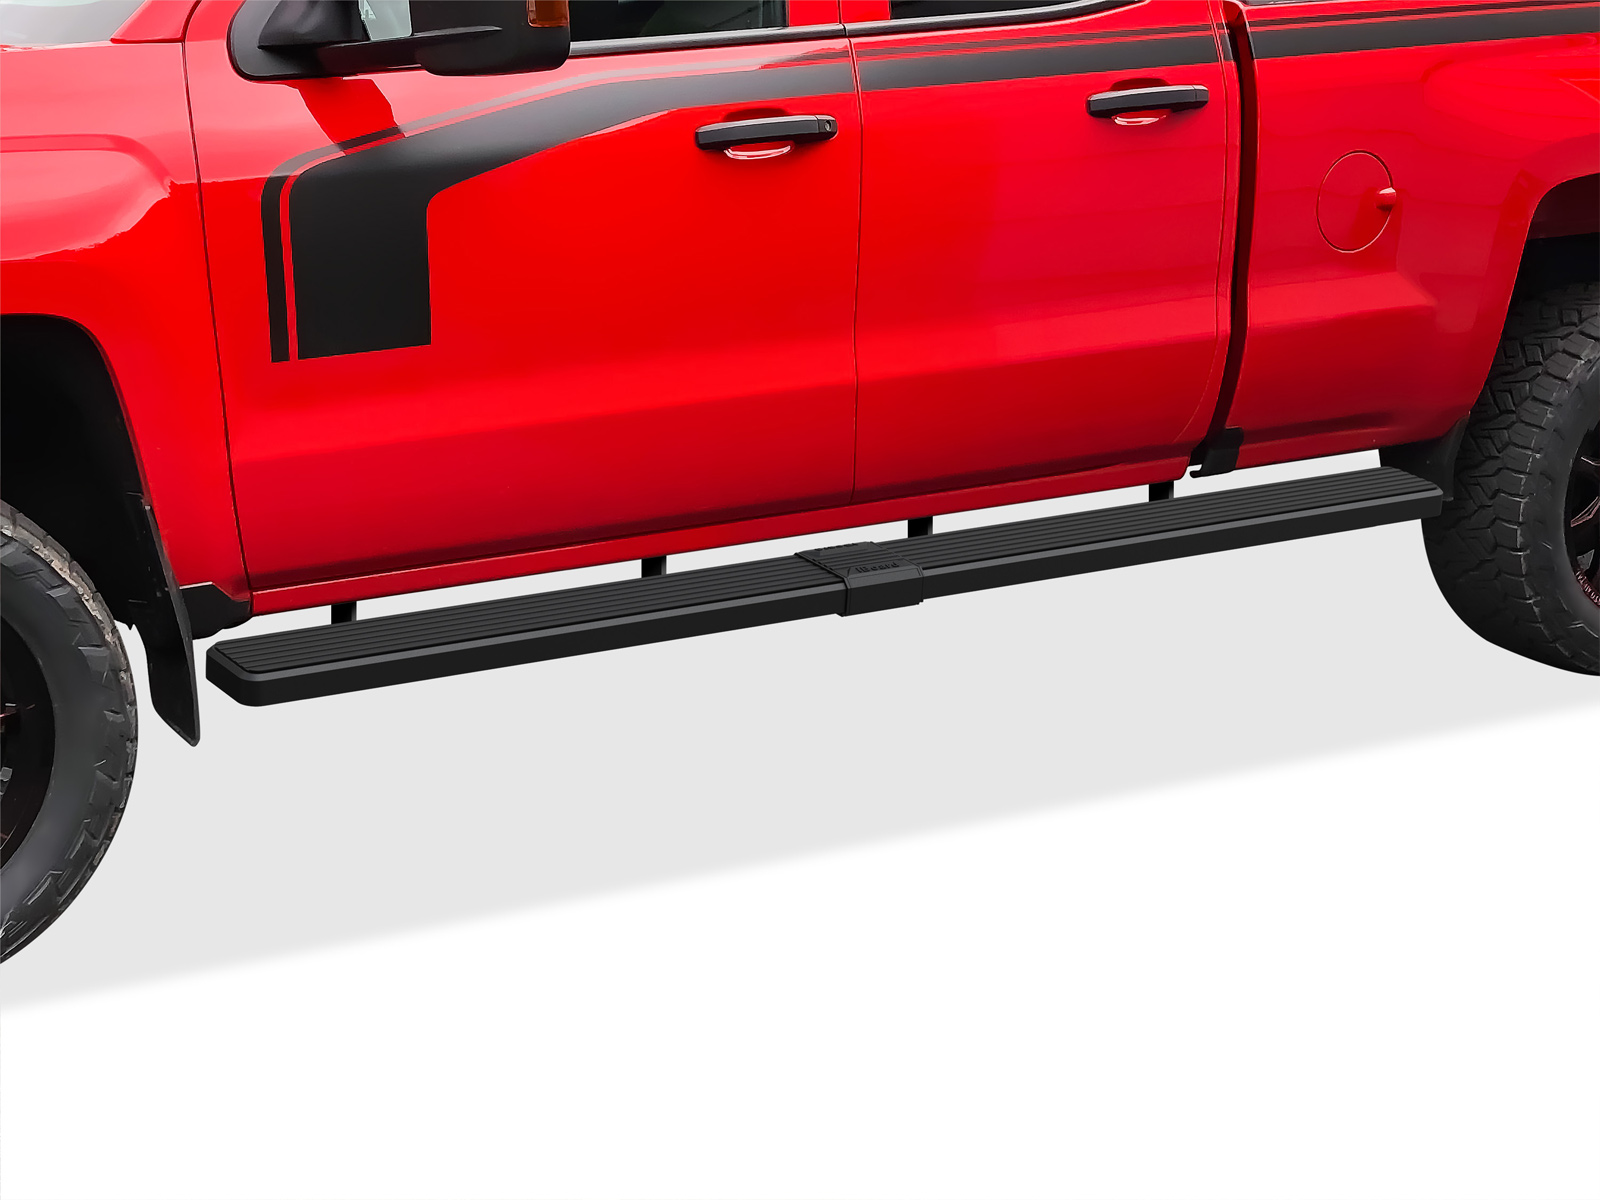 2007-2018 Chevy/GMC Silverado/Sierra 1500 Extended Cab/Double Cab 6.5 ft Bed (Incl. 2019 Silverado 1500 LD & 2019 Sierra 1500 Limited) 2007-2019 Chevy/GMC Silverado/Sierra 2500 HD/3500 HD Extended Cab/Double Cab 6.5ft Bed (Incl. Diesel models with DEF tan